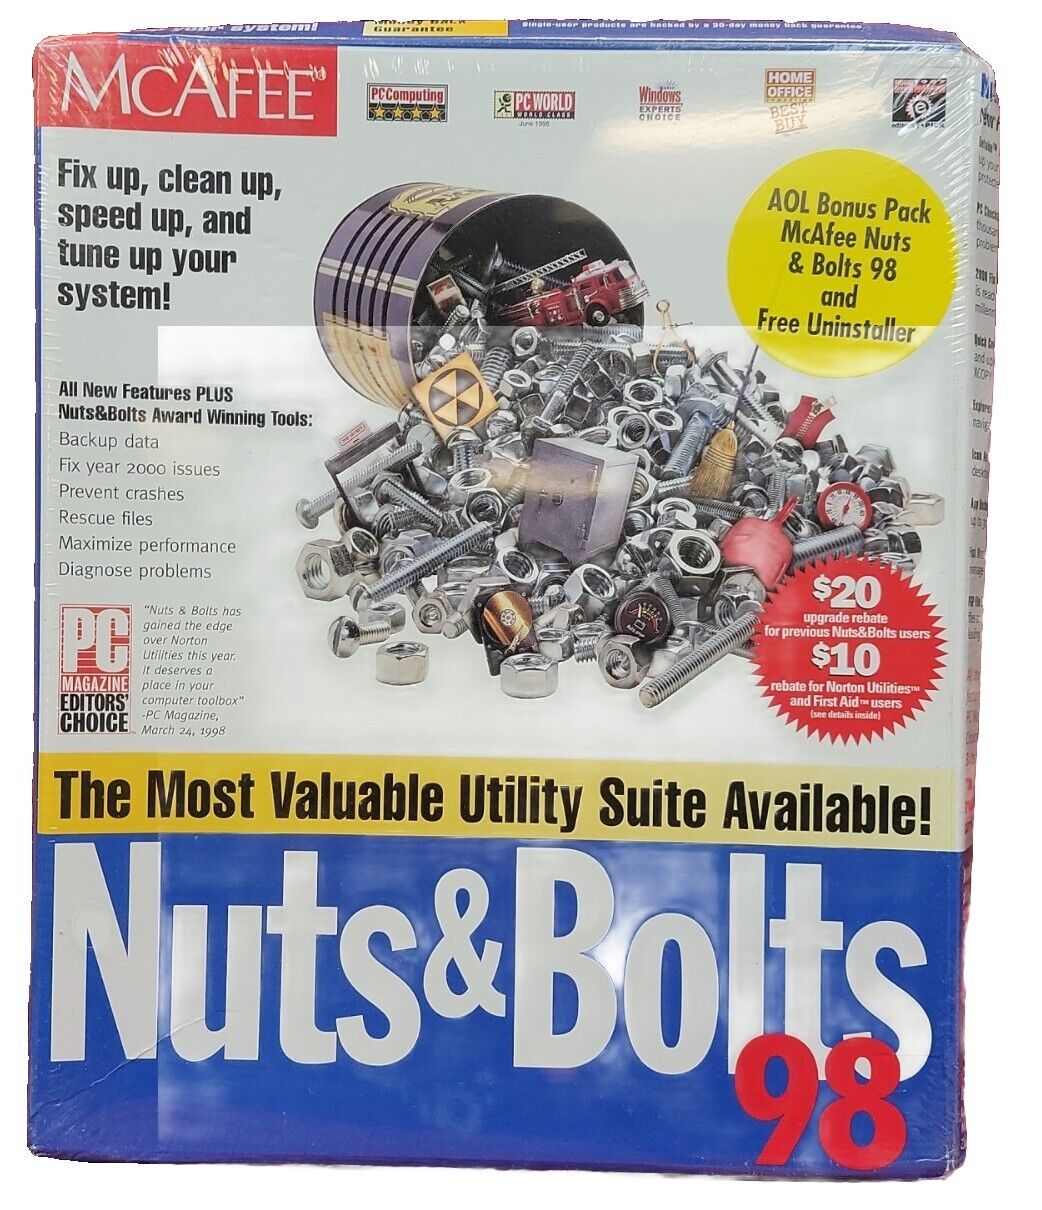 NEW SEALED Mcafee Nuts & Bolts CD-Rom 1998 98' VALUABLE UTILITY SIGHT